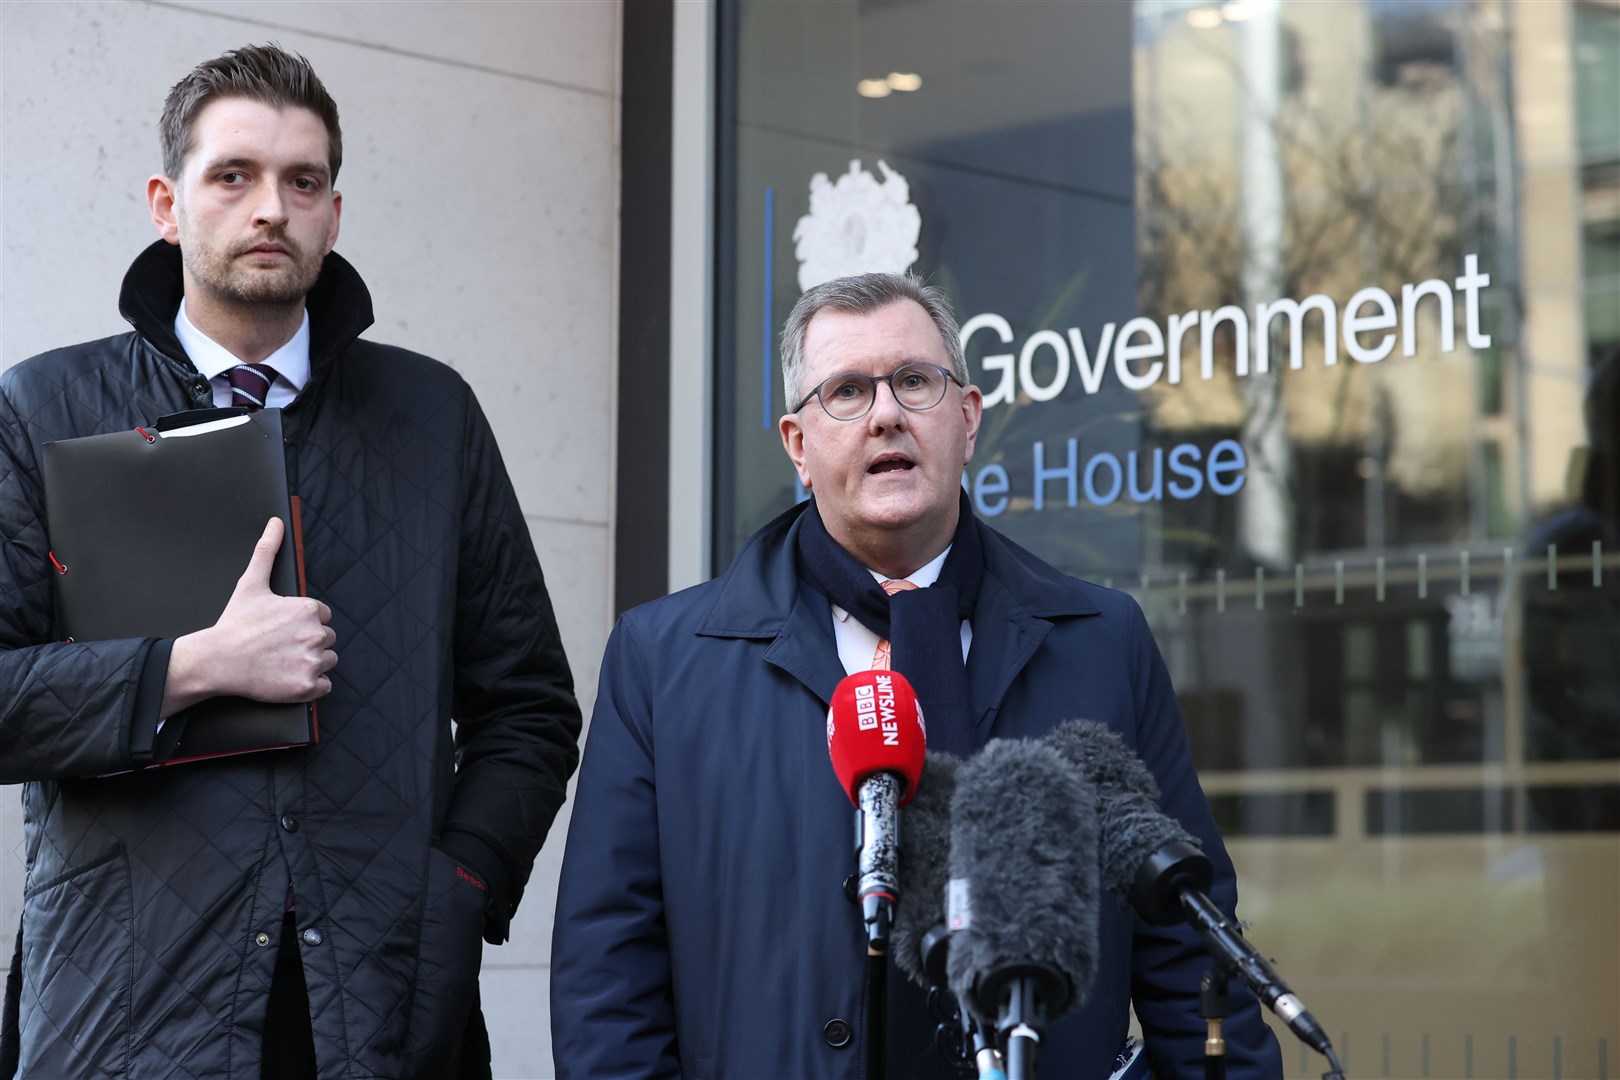 Leader of the DUP Sir Jeffrey Donaldson MP, with Phillip Brett, speaking to the media outside Erskine House, Belfast in Northern Ireland, following a meeting with Northern Ireland Secretary Chris Heaton-Harris (Liam McBurney/PA)